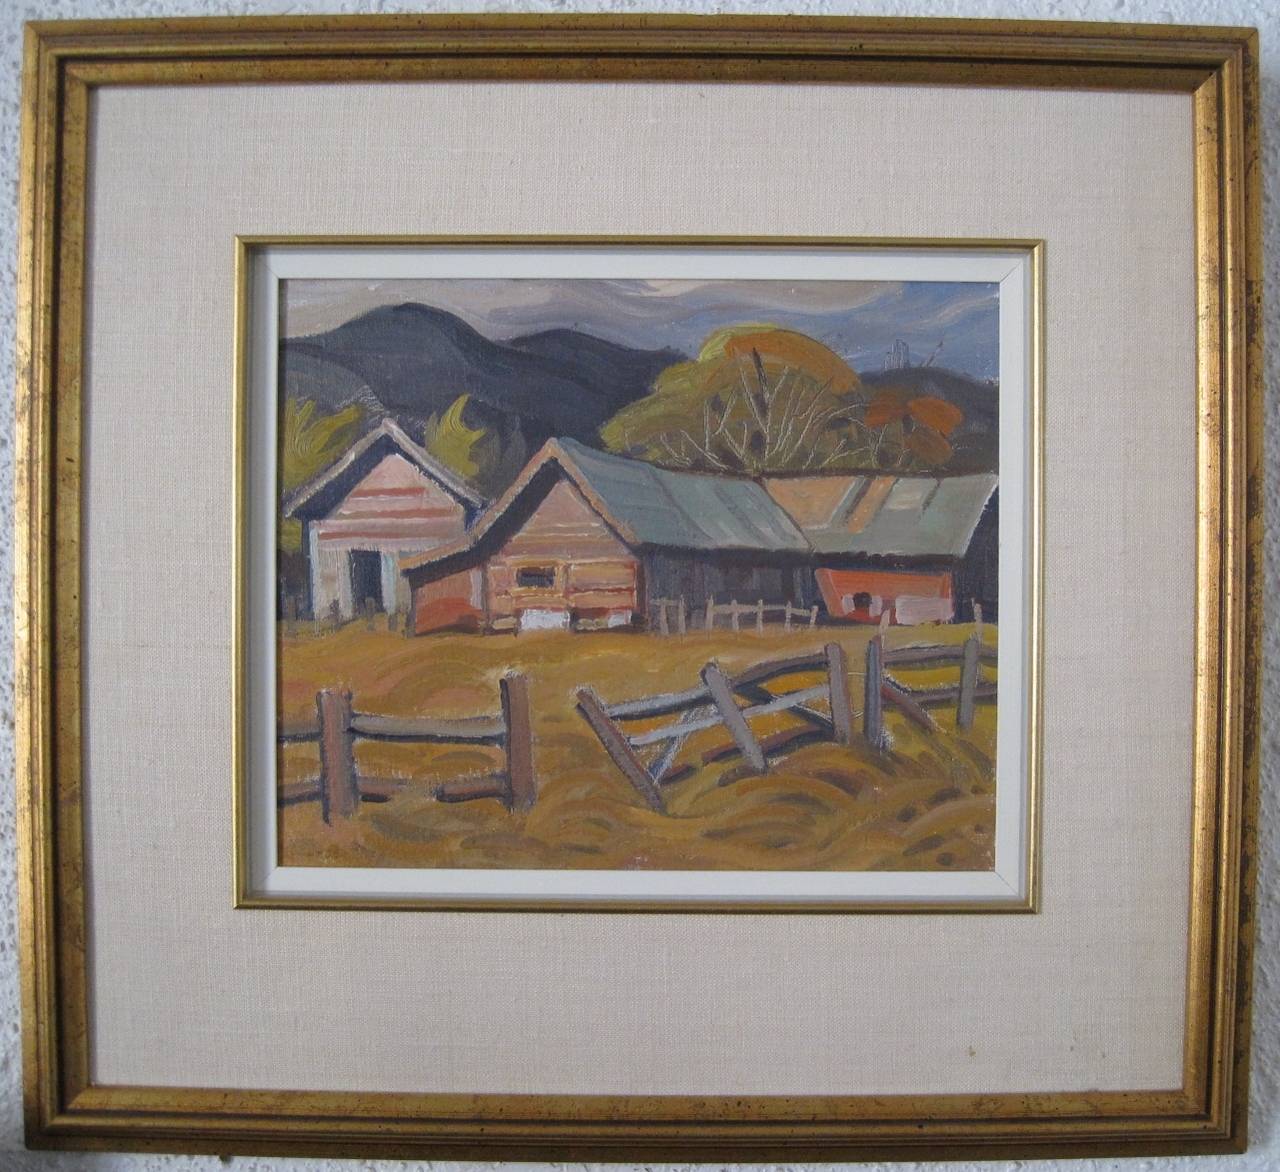 Henry George Glyde Oil Painting (1906-1998) - Canada

Free shipping within the United States and Canada.

Henry George Glyde was born in Luton, England in 1906. He studied at the Royal Academy in London, majoring in mural design and the history